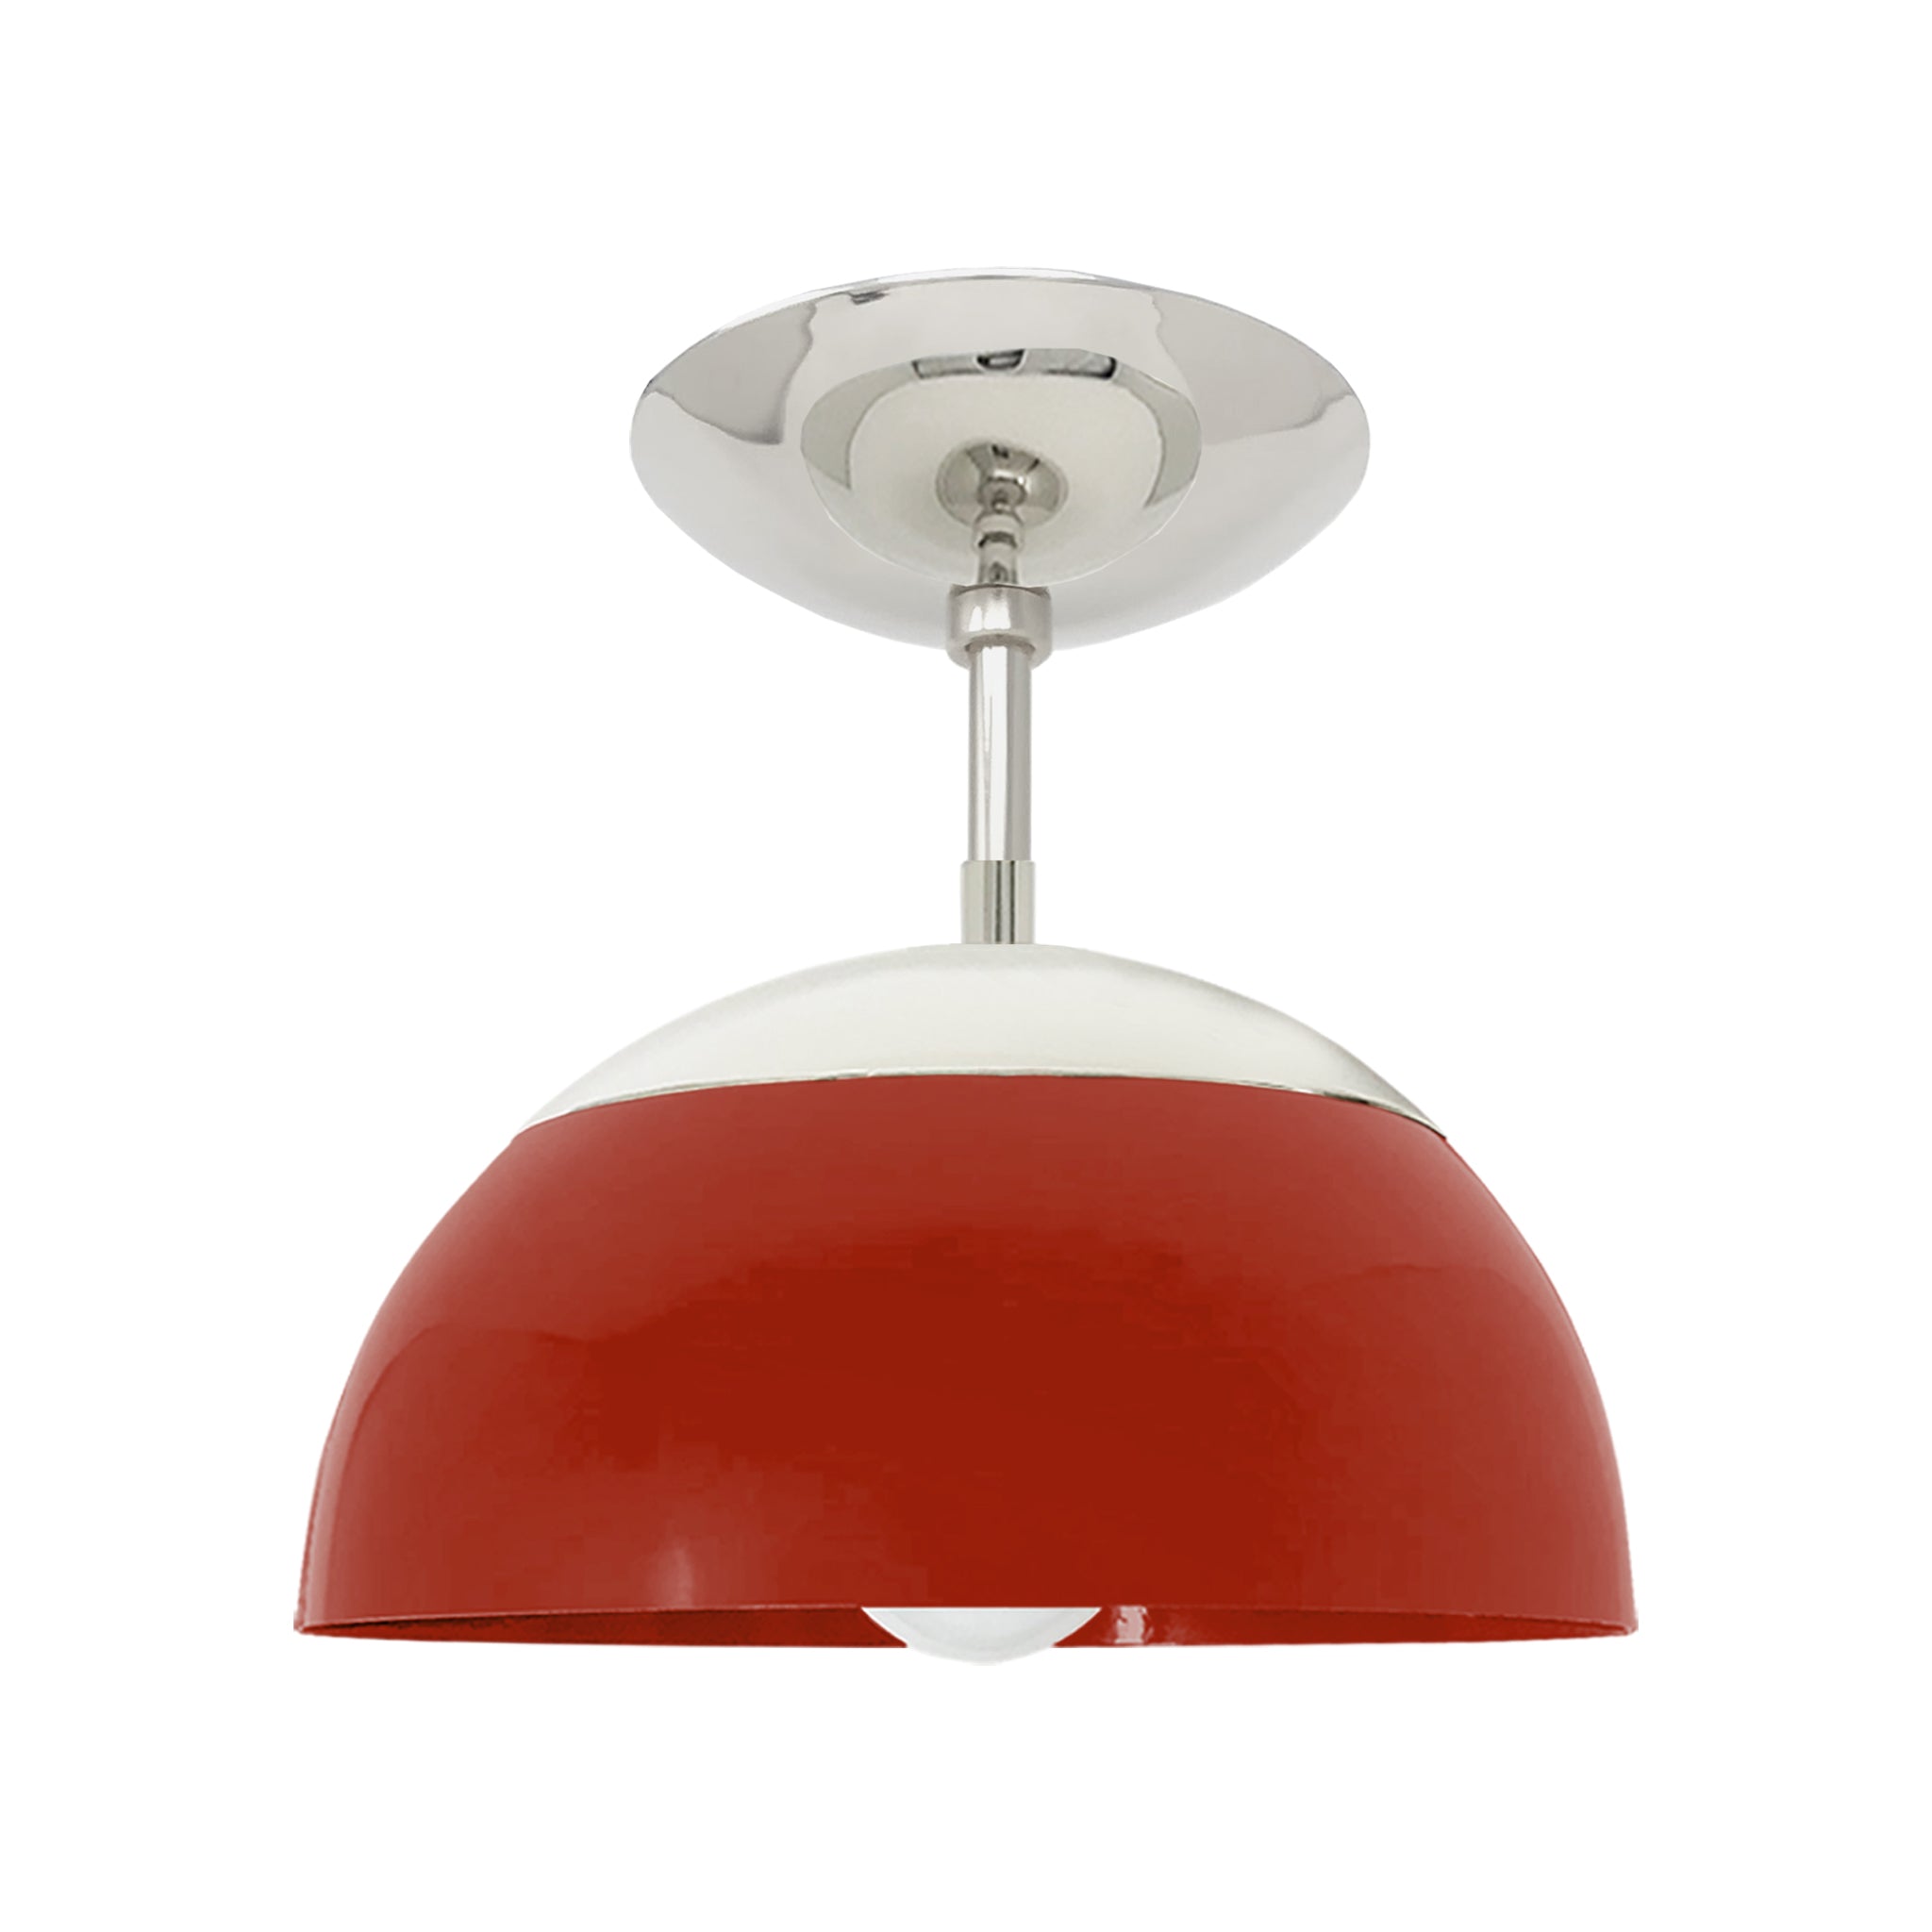 Nickel and riding hood red color Cadbury flush mount 10" Dutton Brown lighting